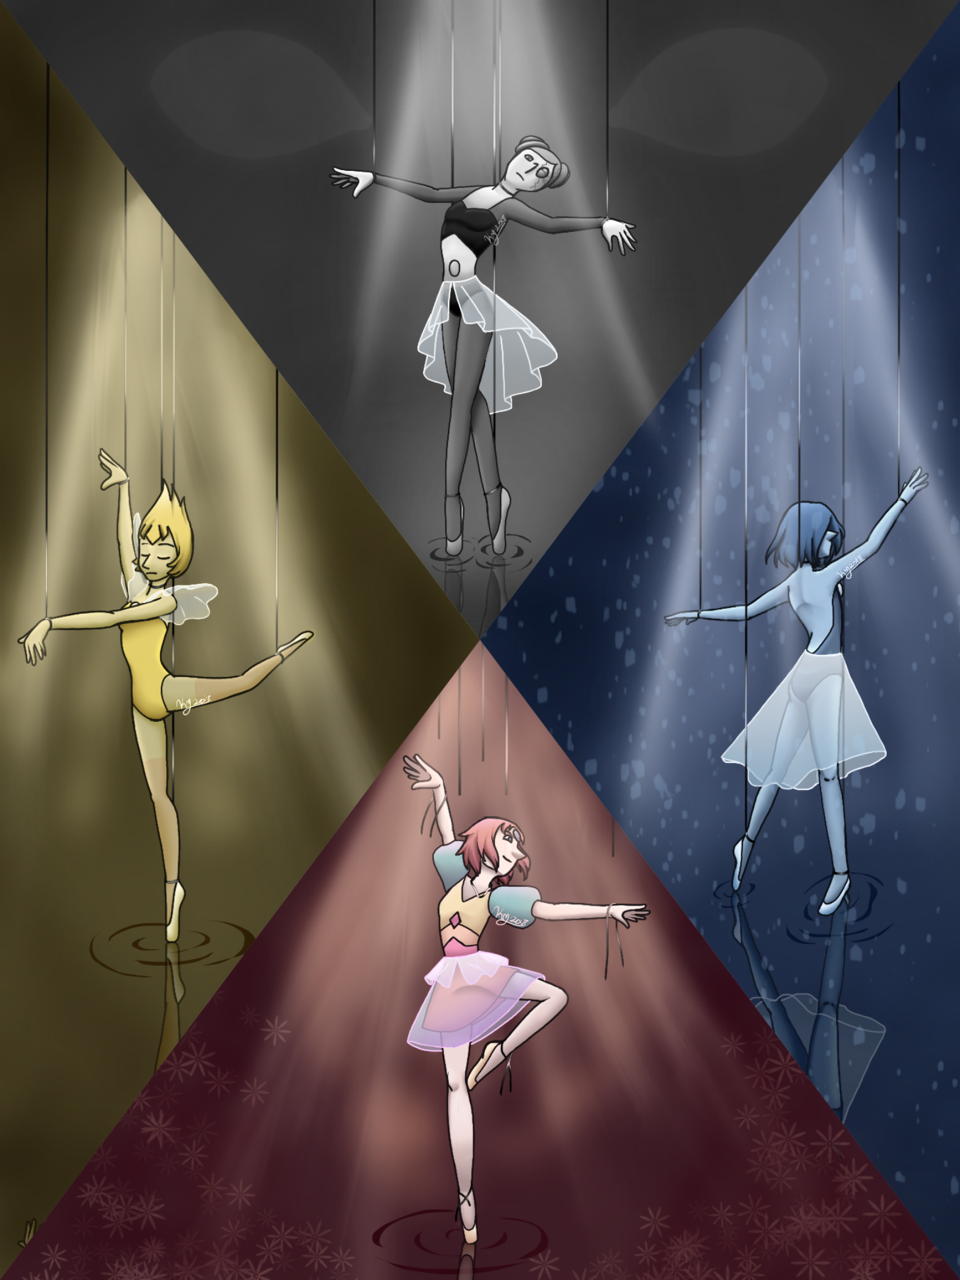 The newest episode of Steven Universe killed me, and I had to draw all four Pearls.